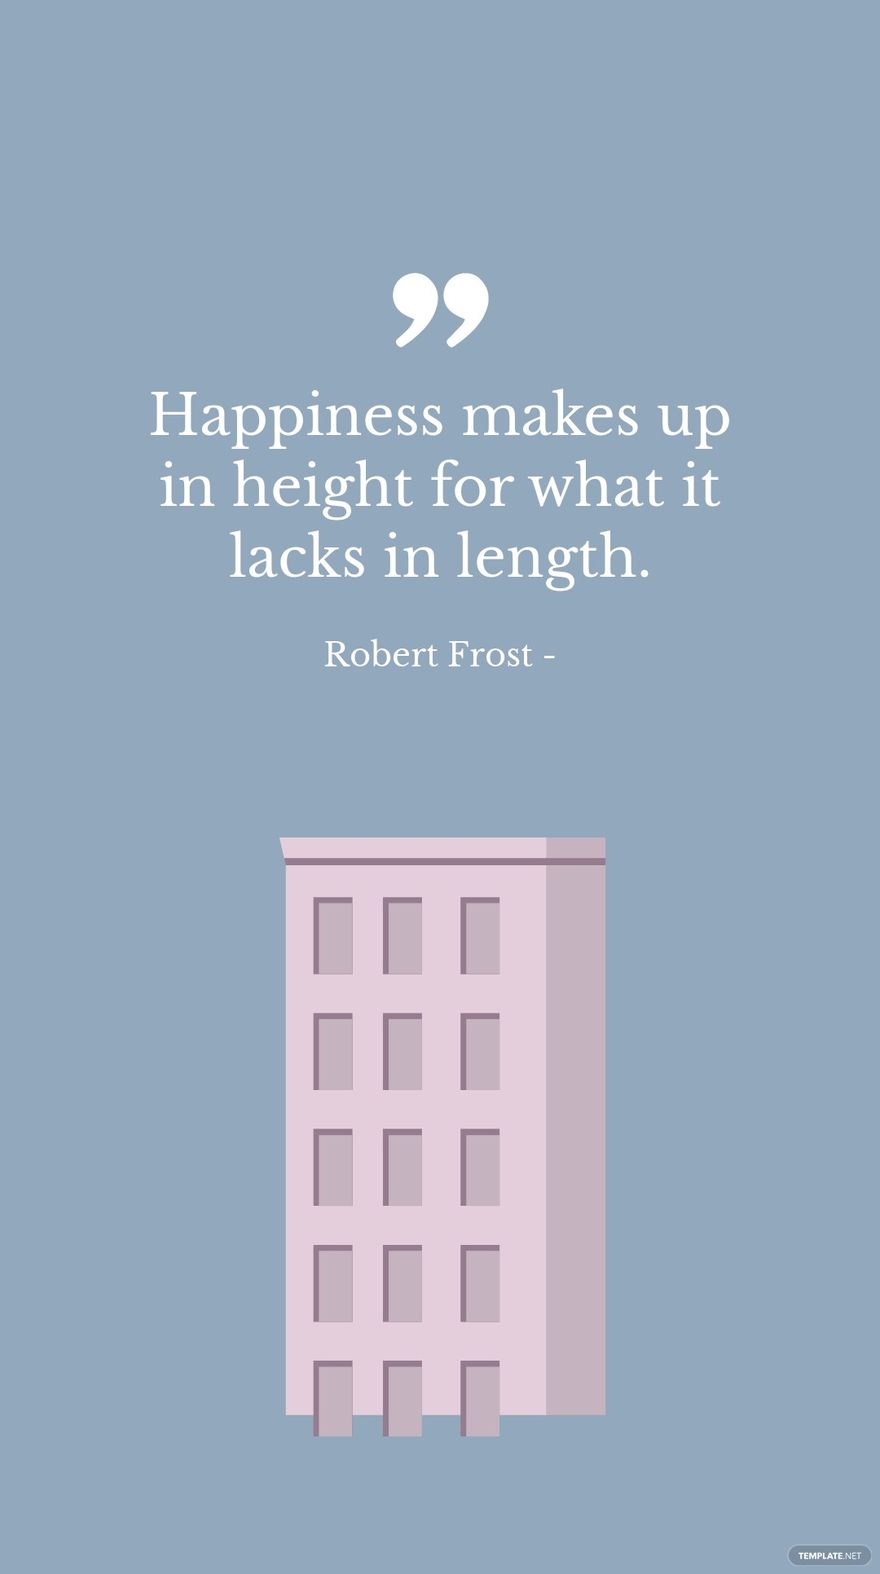 Free Robert Frost - Happiness makes up in height for what it lacks in length. in JPG